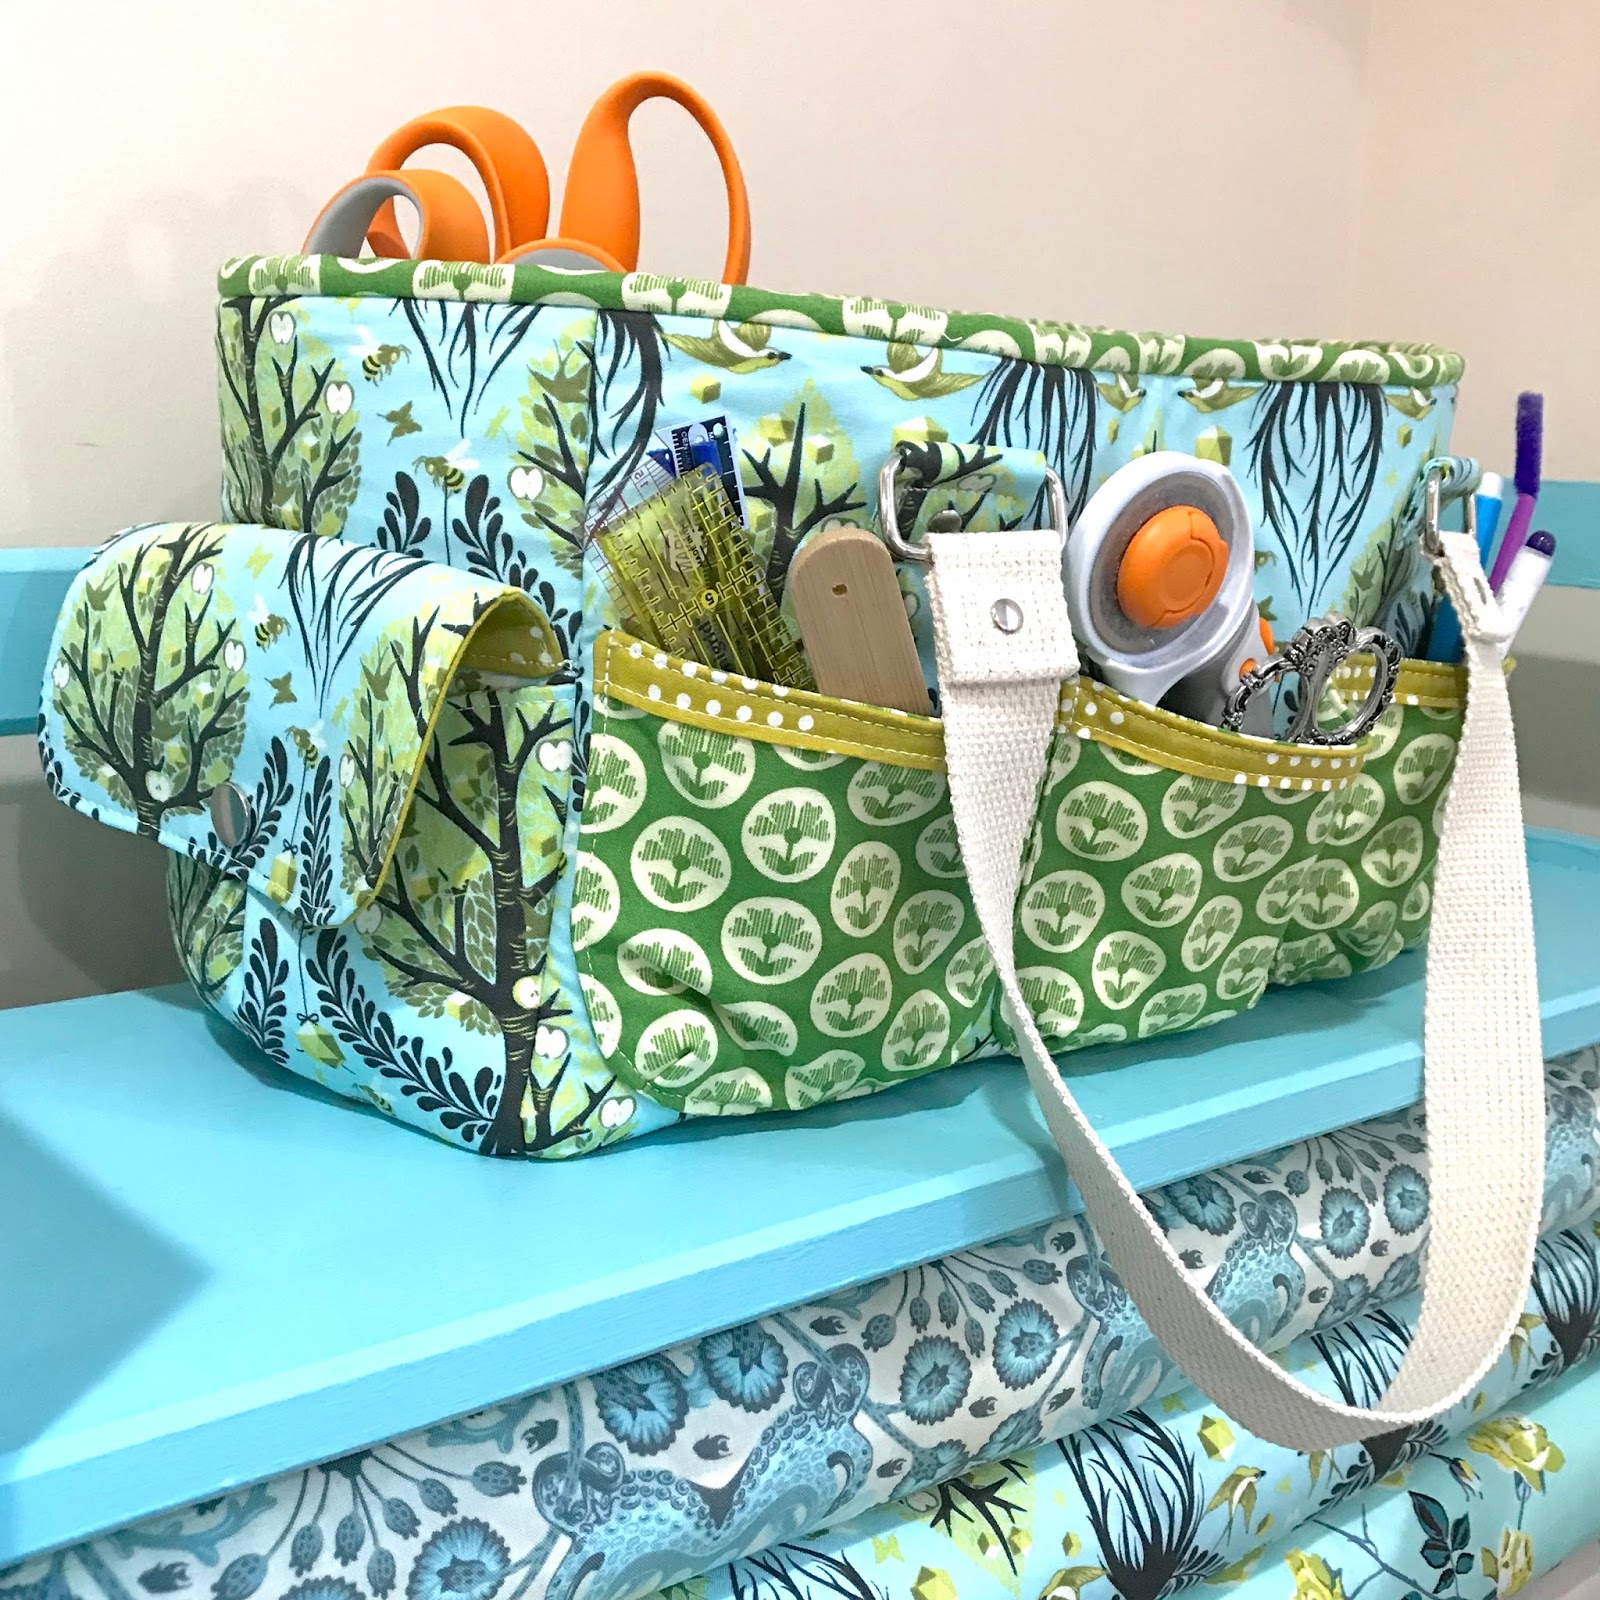 Trina Peterson: Project Quilting 9.5: The Oslo Craft Bag